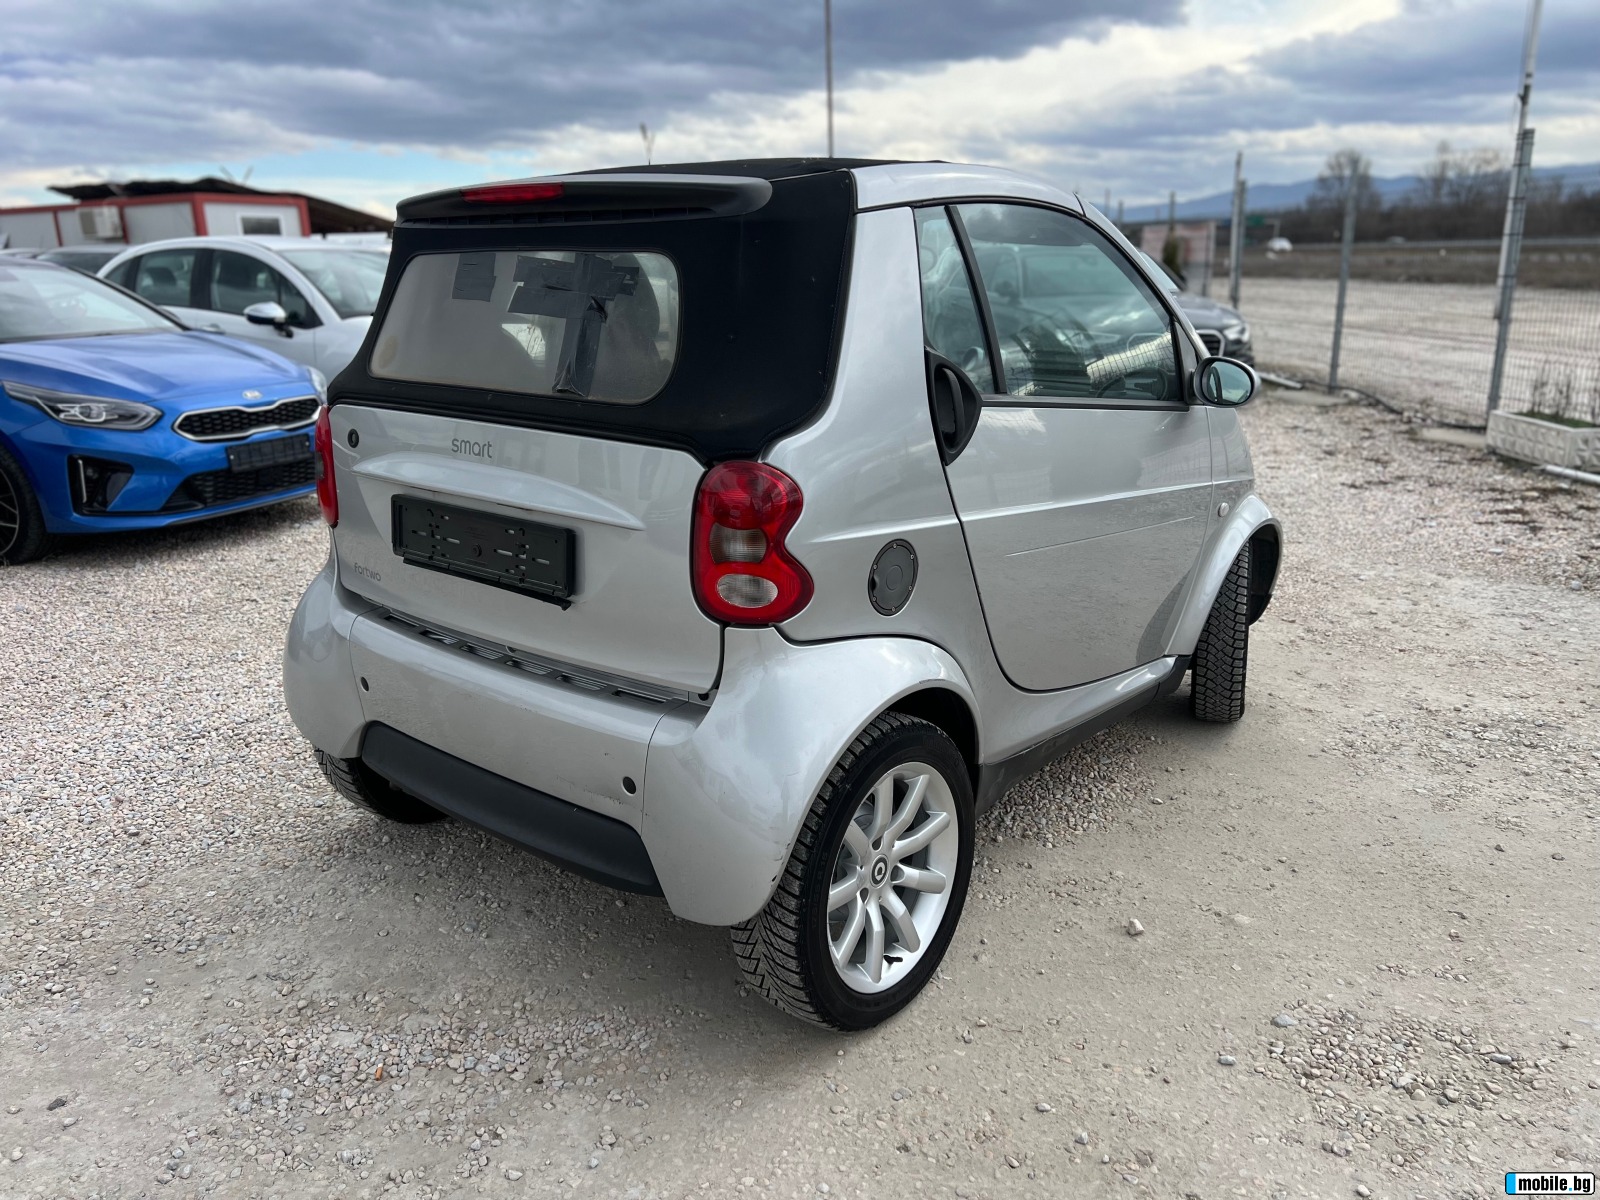 Smart Fortwo 0.700I CONVERTIBLE AUTOMATIC | Mobile.bg   6